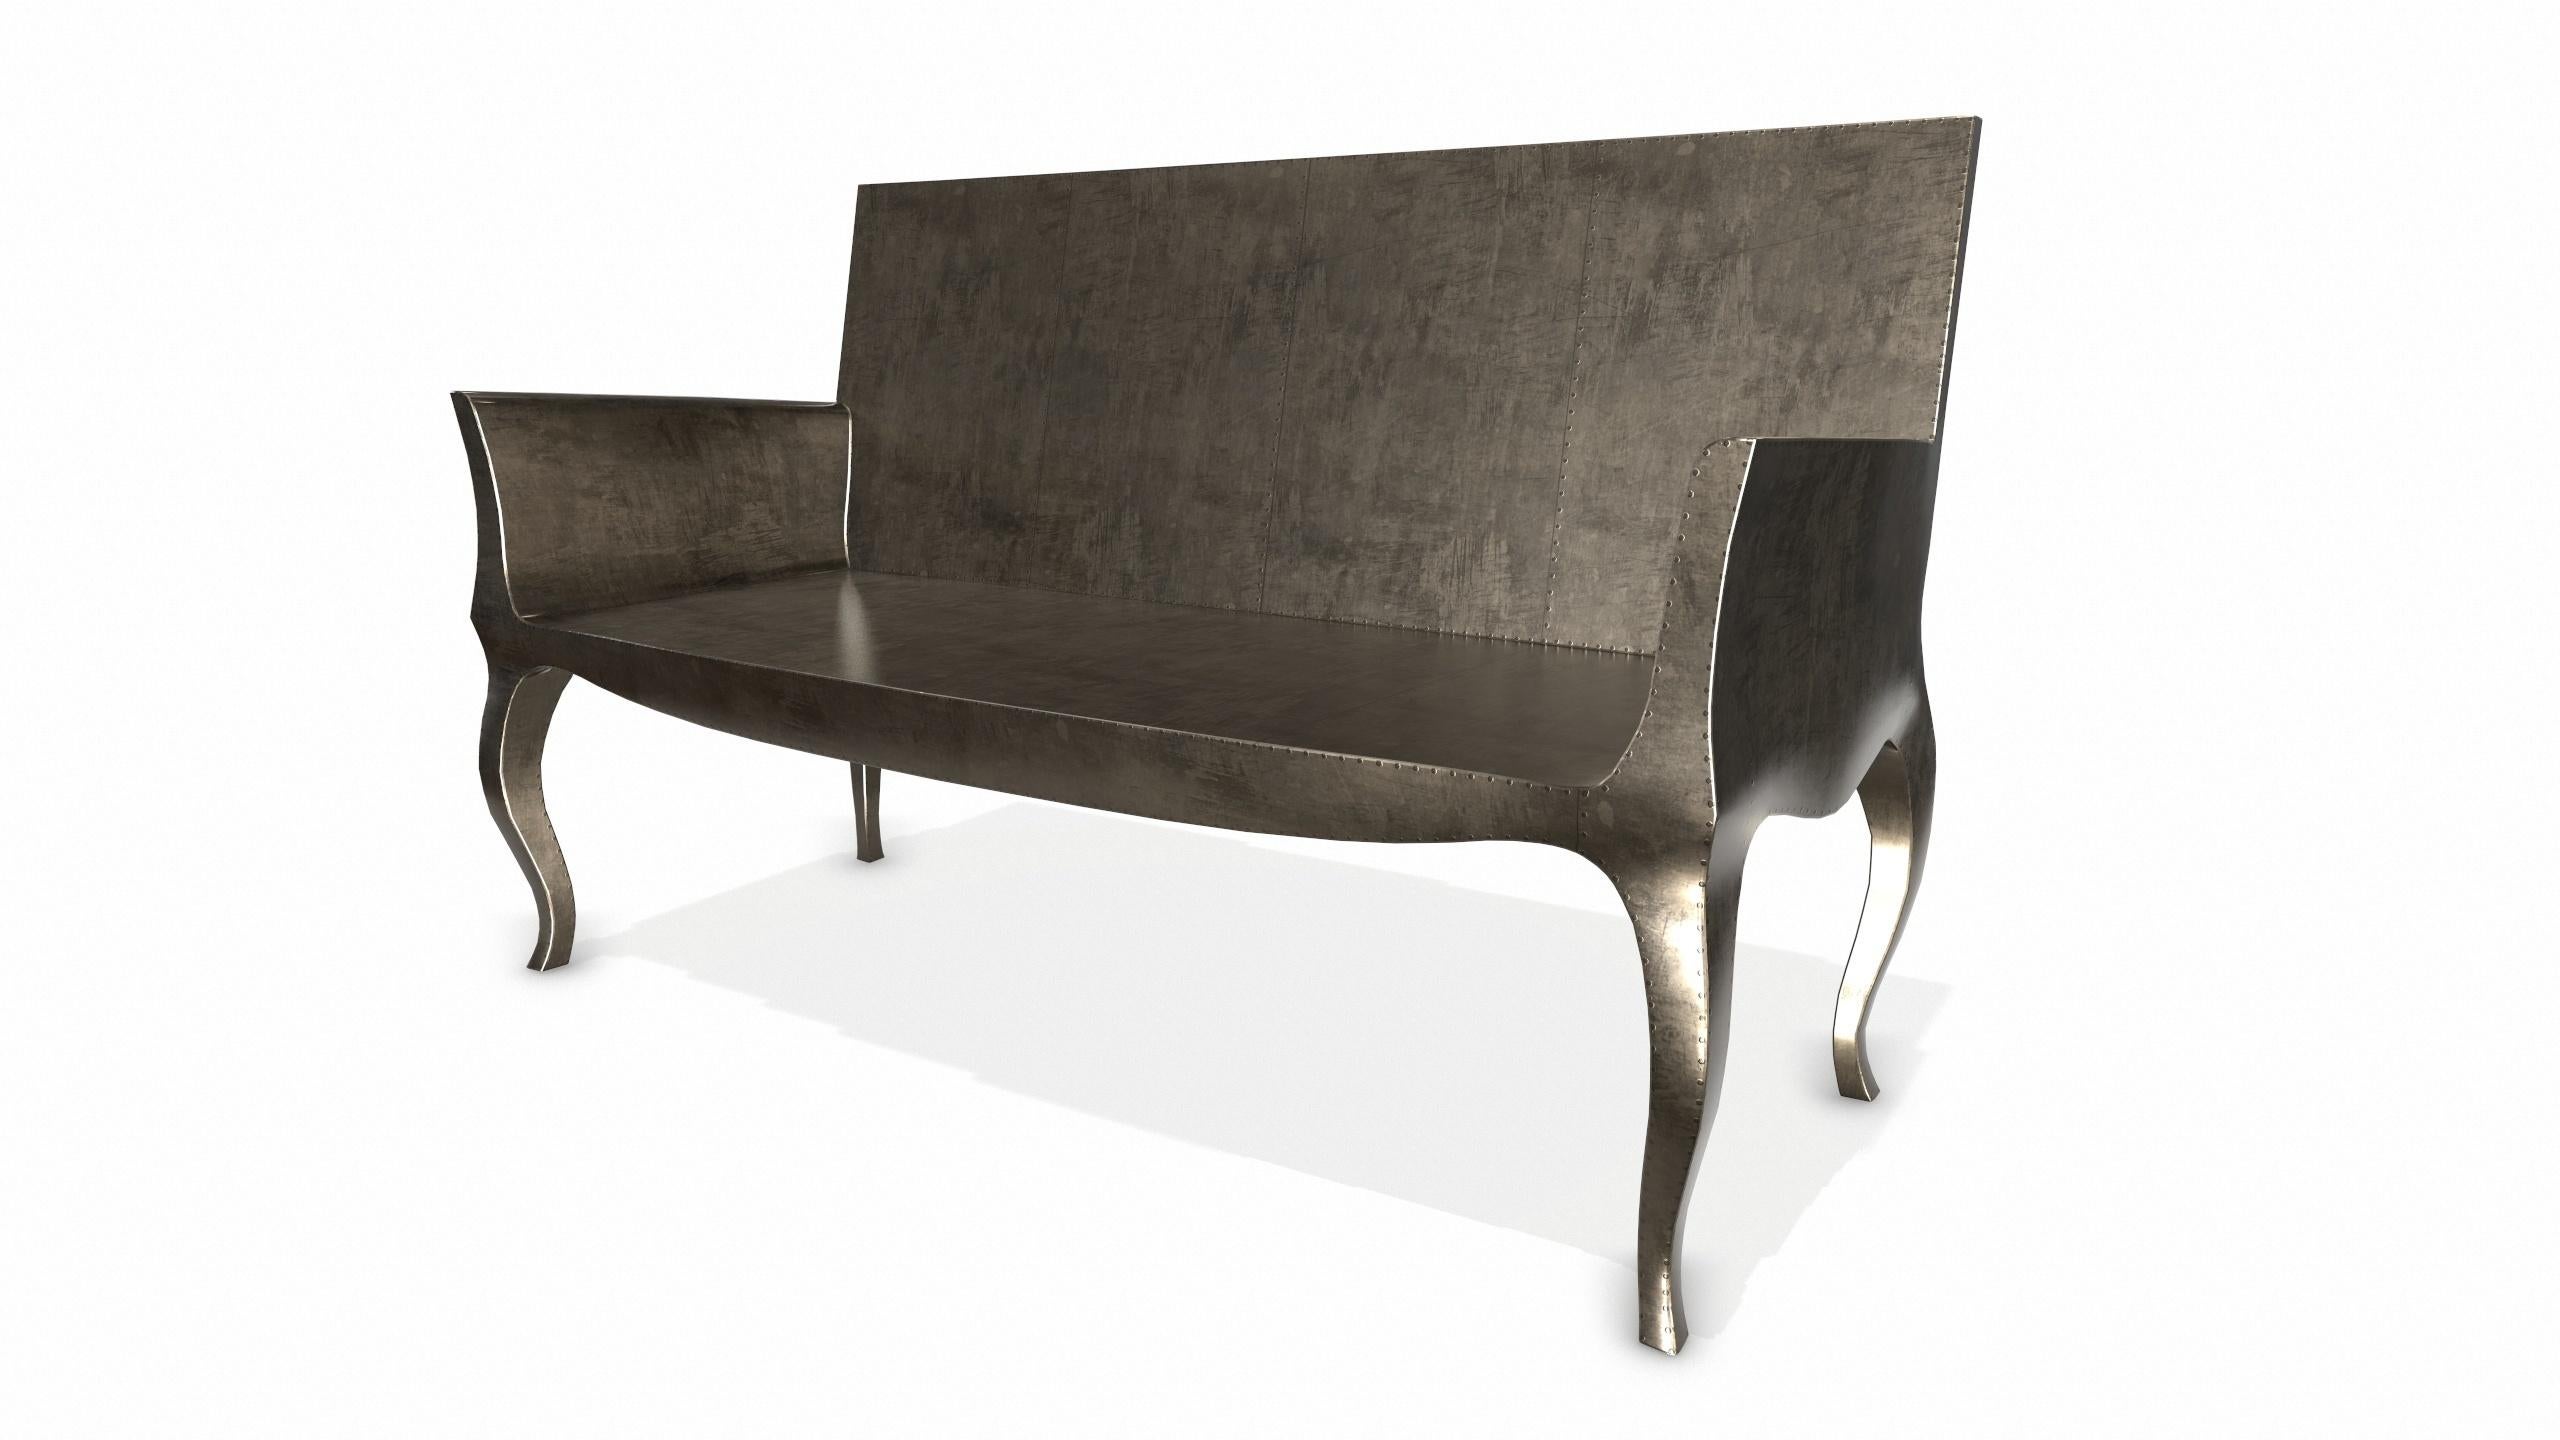 American Louise Settee Art Deco Canapes in Smooth Antique Bronze by Paul Mathieu For Sale